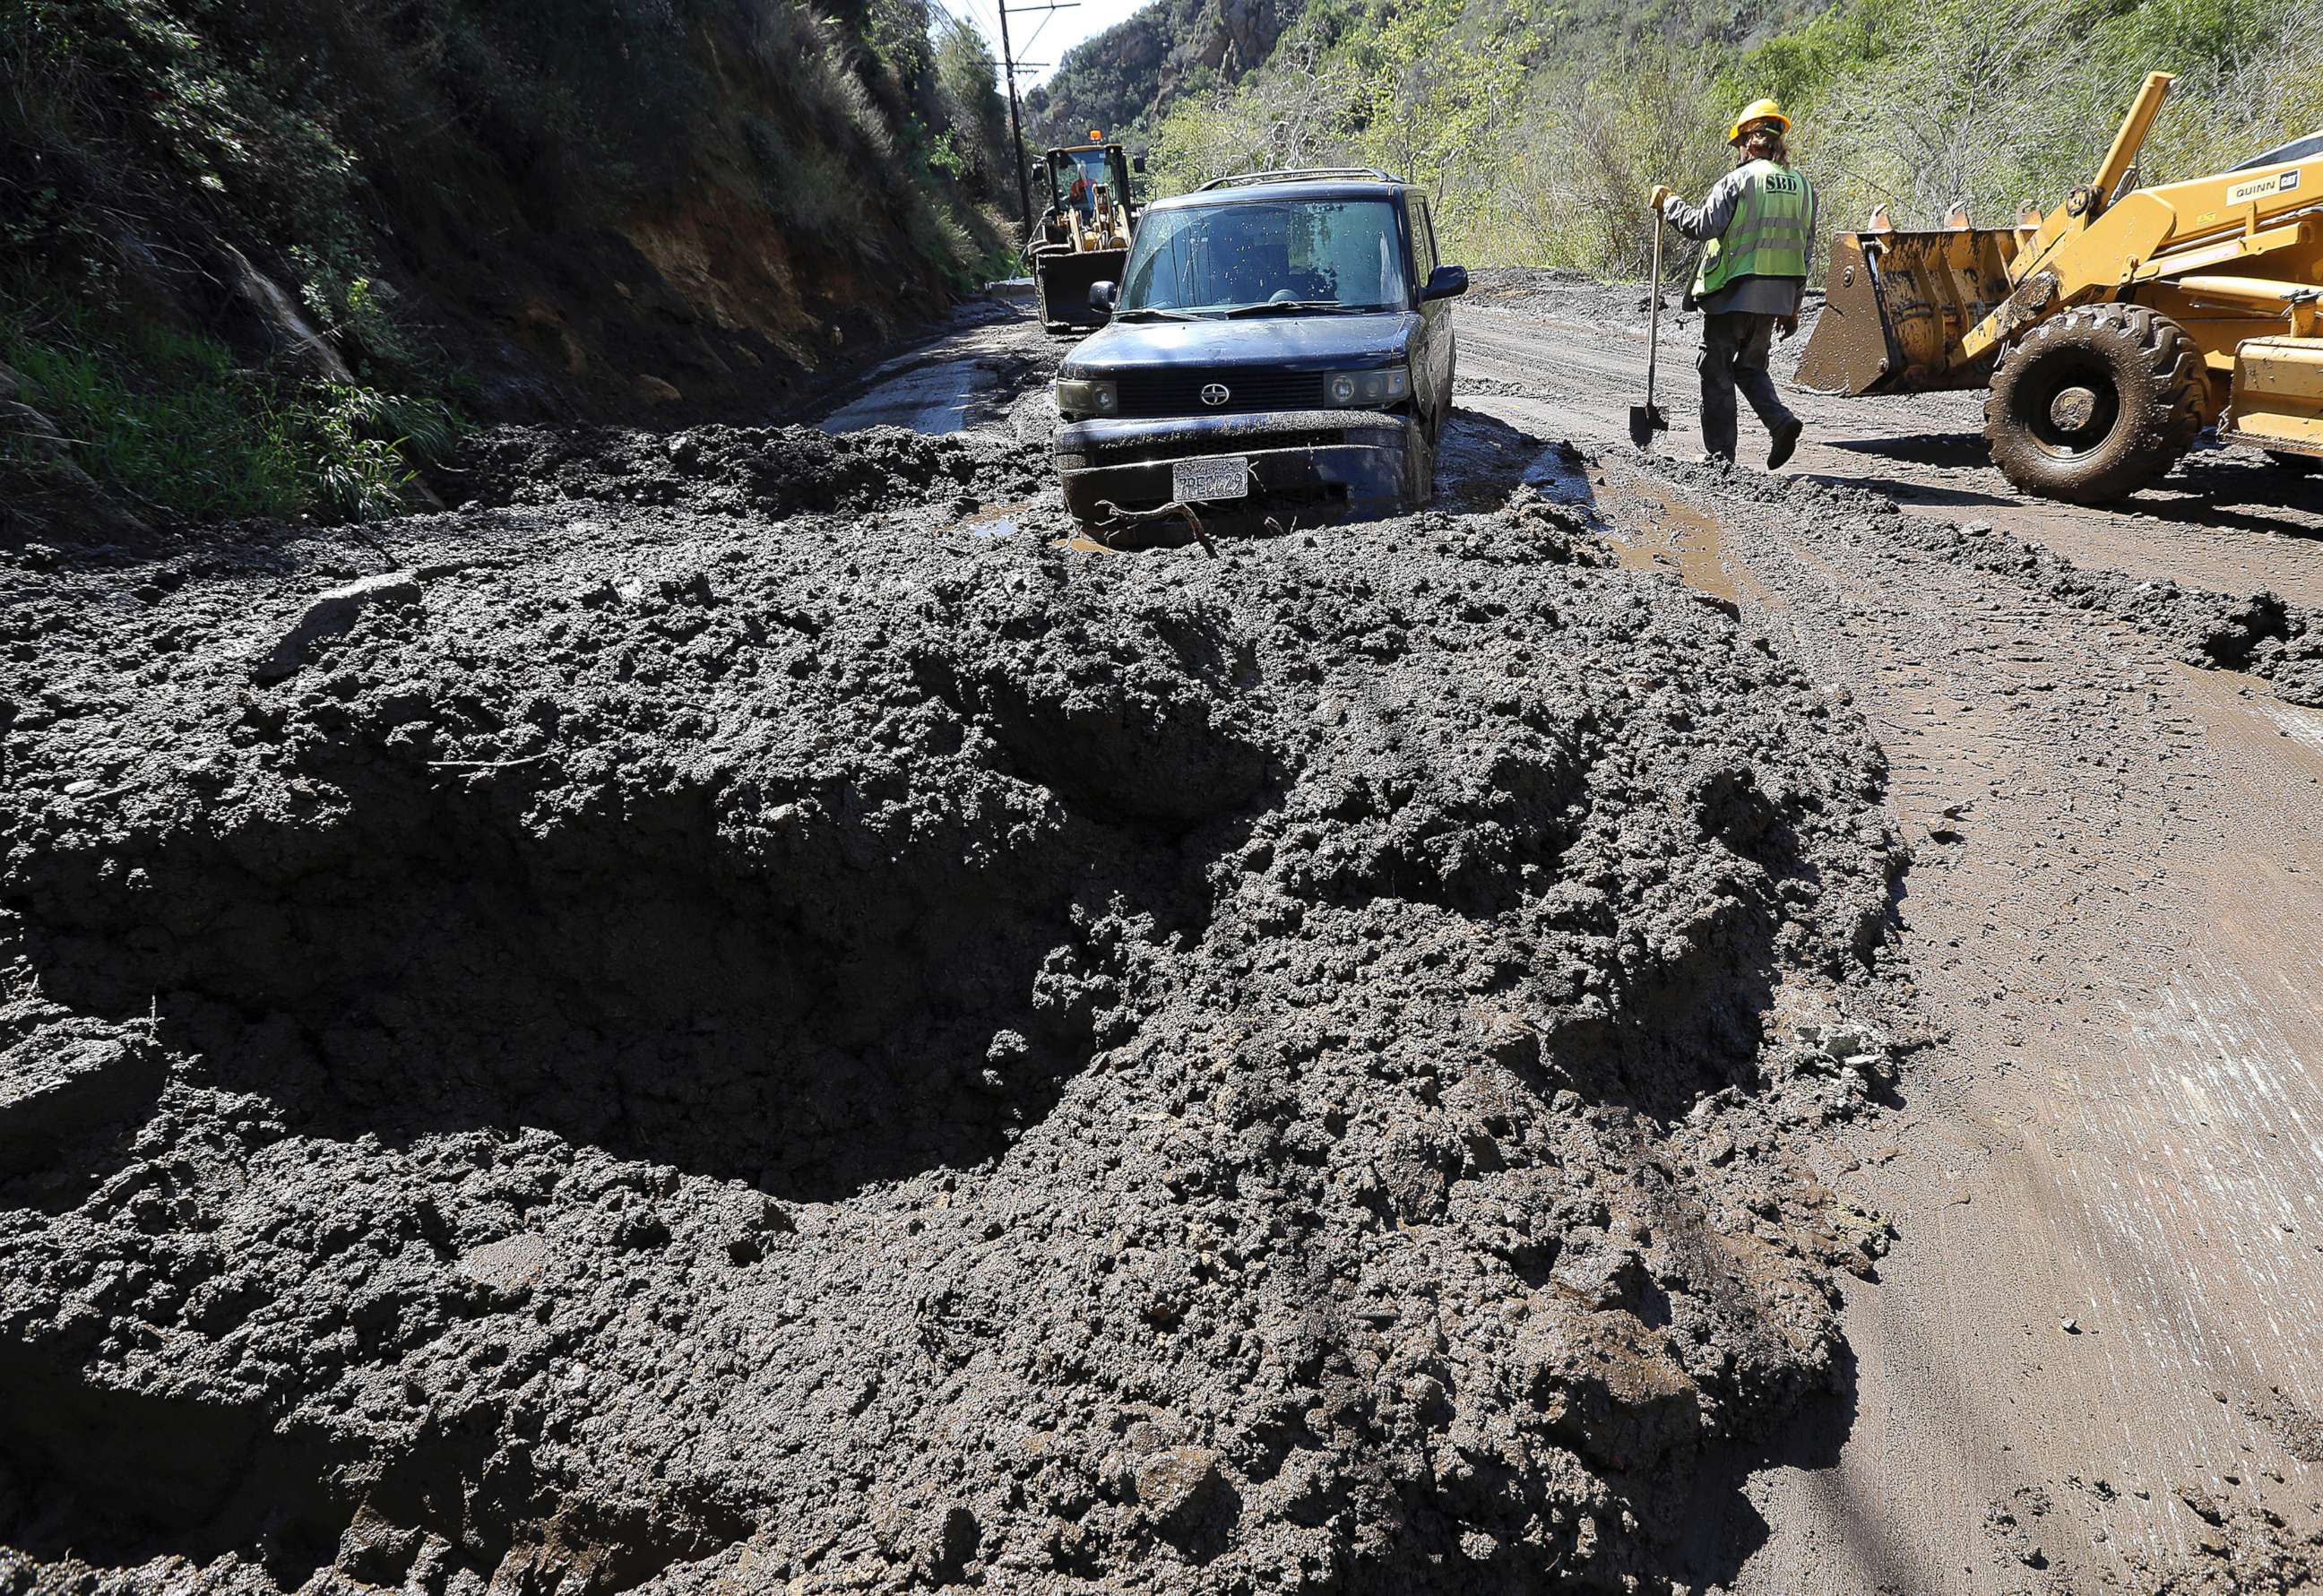 PHOTO: Workers prepare to free a trapped car from tons of debris after mudslides from heavy rain overnight caused the closure of Topanga Canyon Boulevard in Malibu, Calif., March 15, 2018.